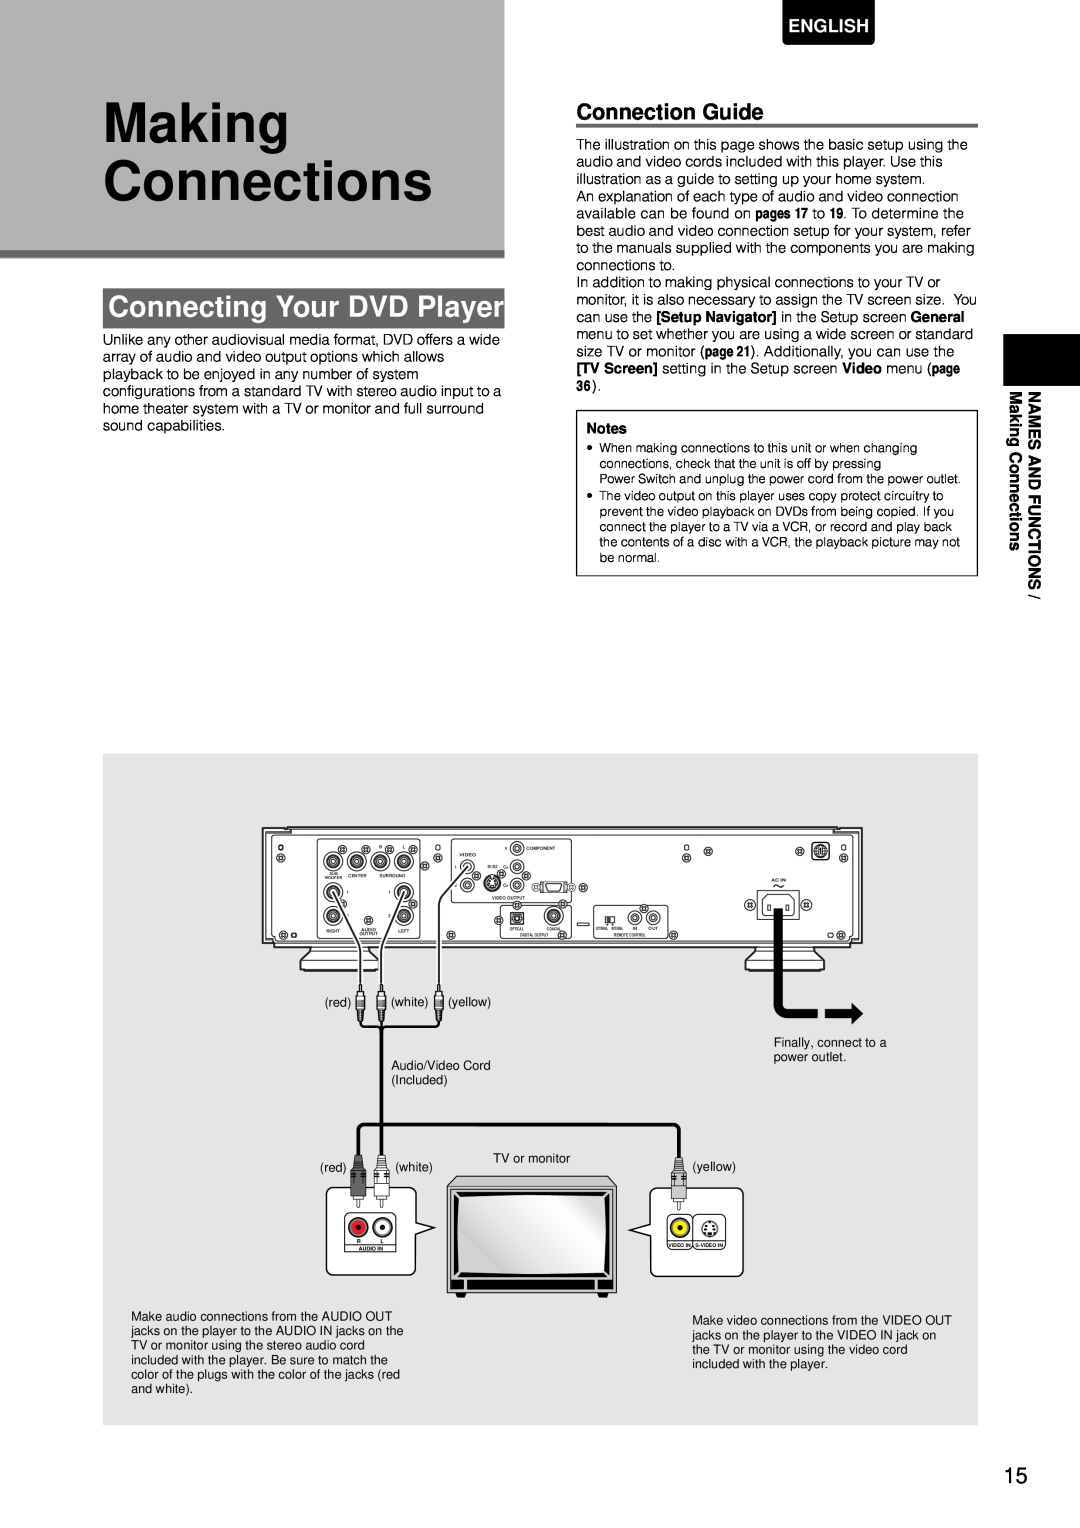 Marantz DV-12S1 manual Making Connections, Connecting Your DVD Player, Connection Guide, English 